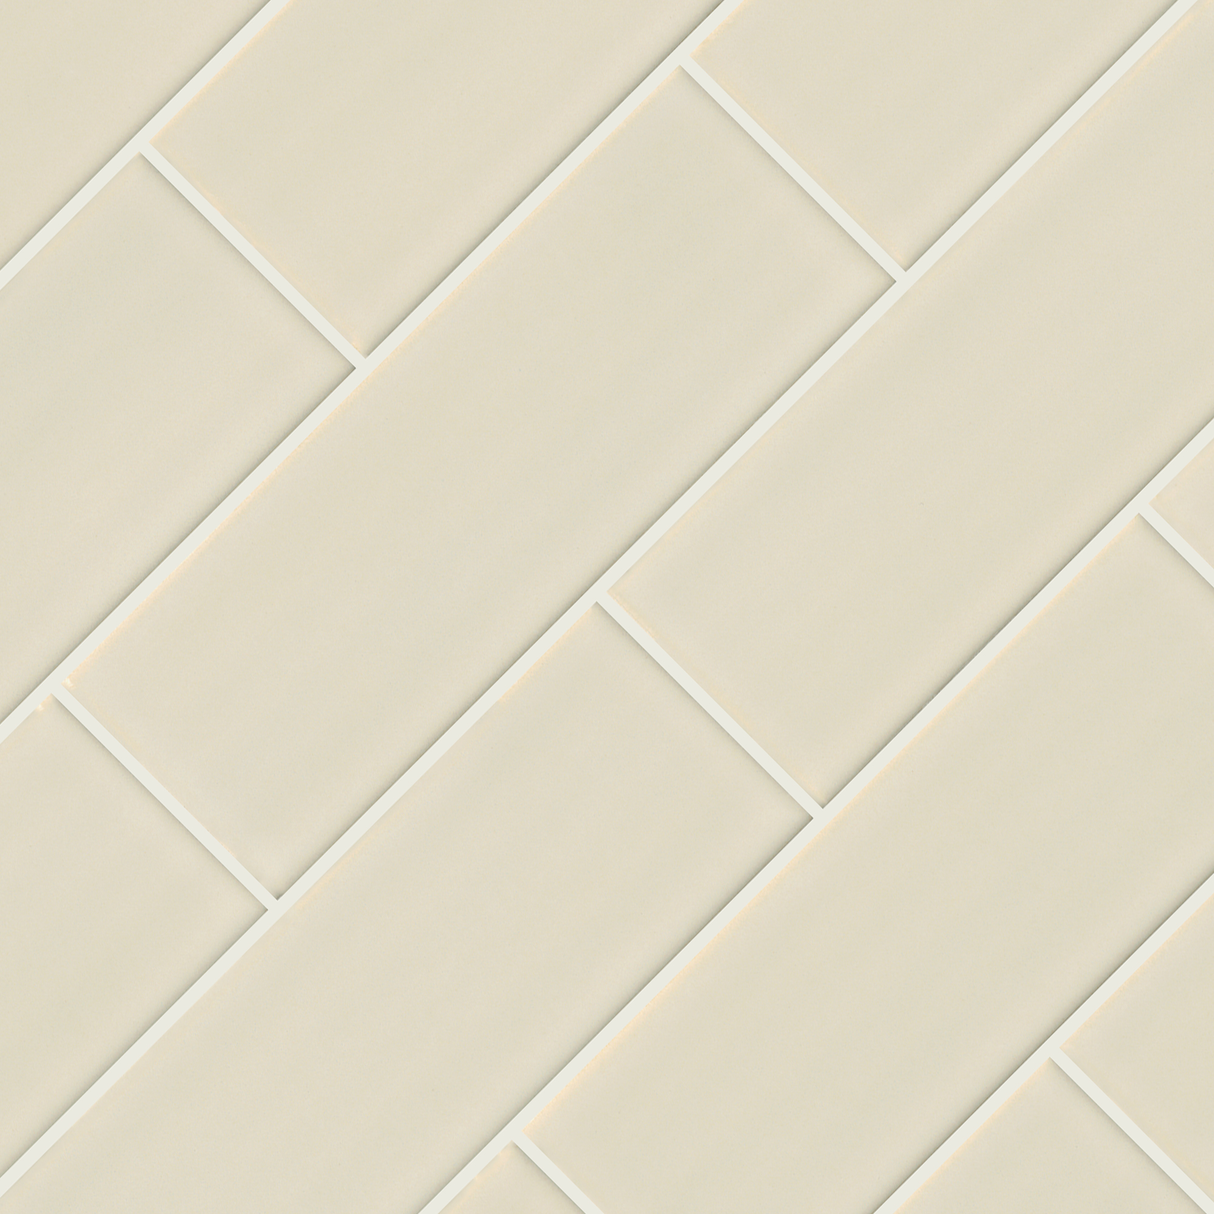 Antique white 4x12 handcrafted glazed ceramic wall tile  msi collection SMOT-PT-AW412 product shot angle view